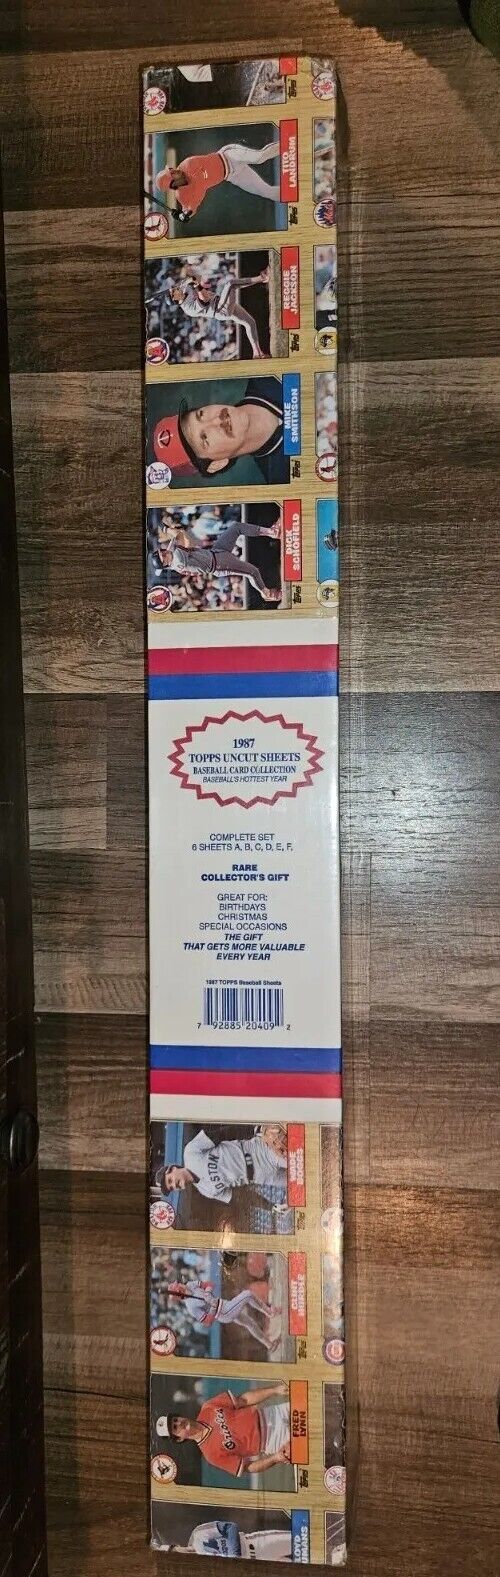 1987 TOPPS BASEBALL Complete SET - 6 UNCUT SHEETS 792 CARDS SHEET- In Plastic